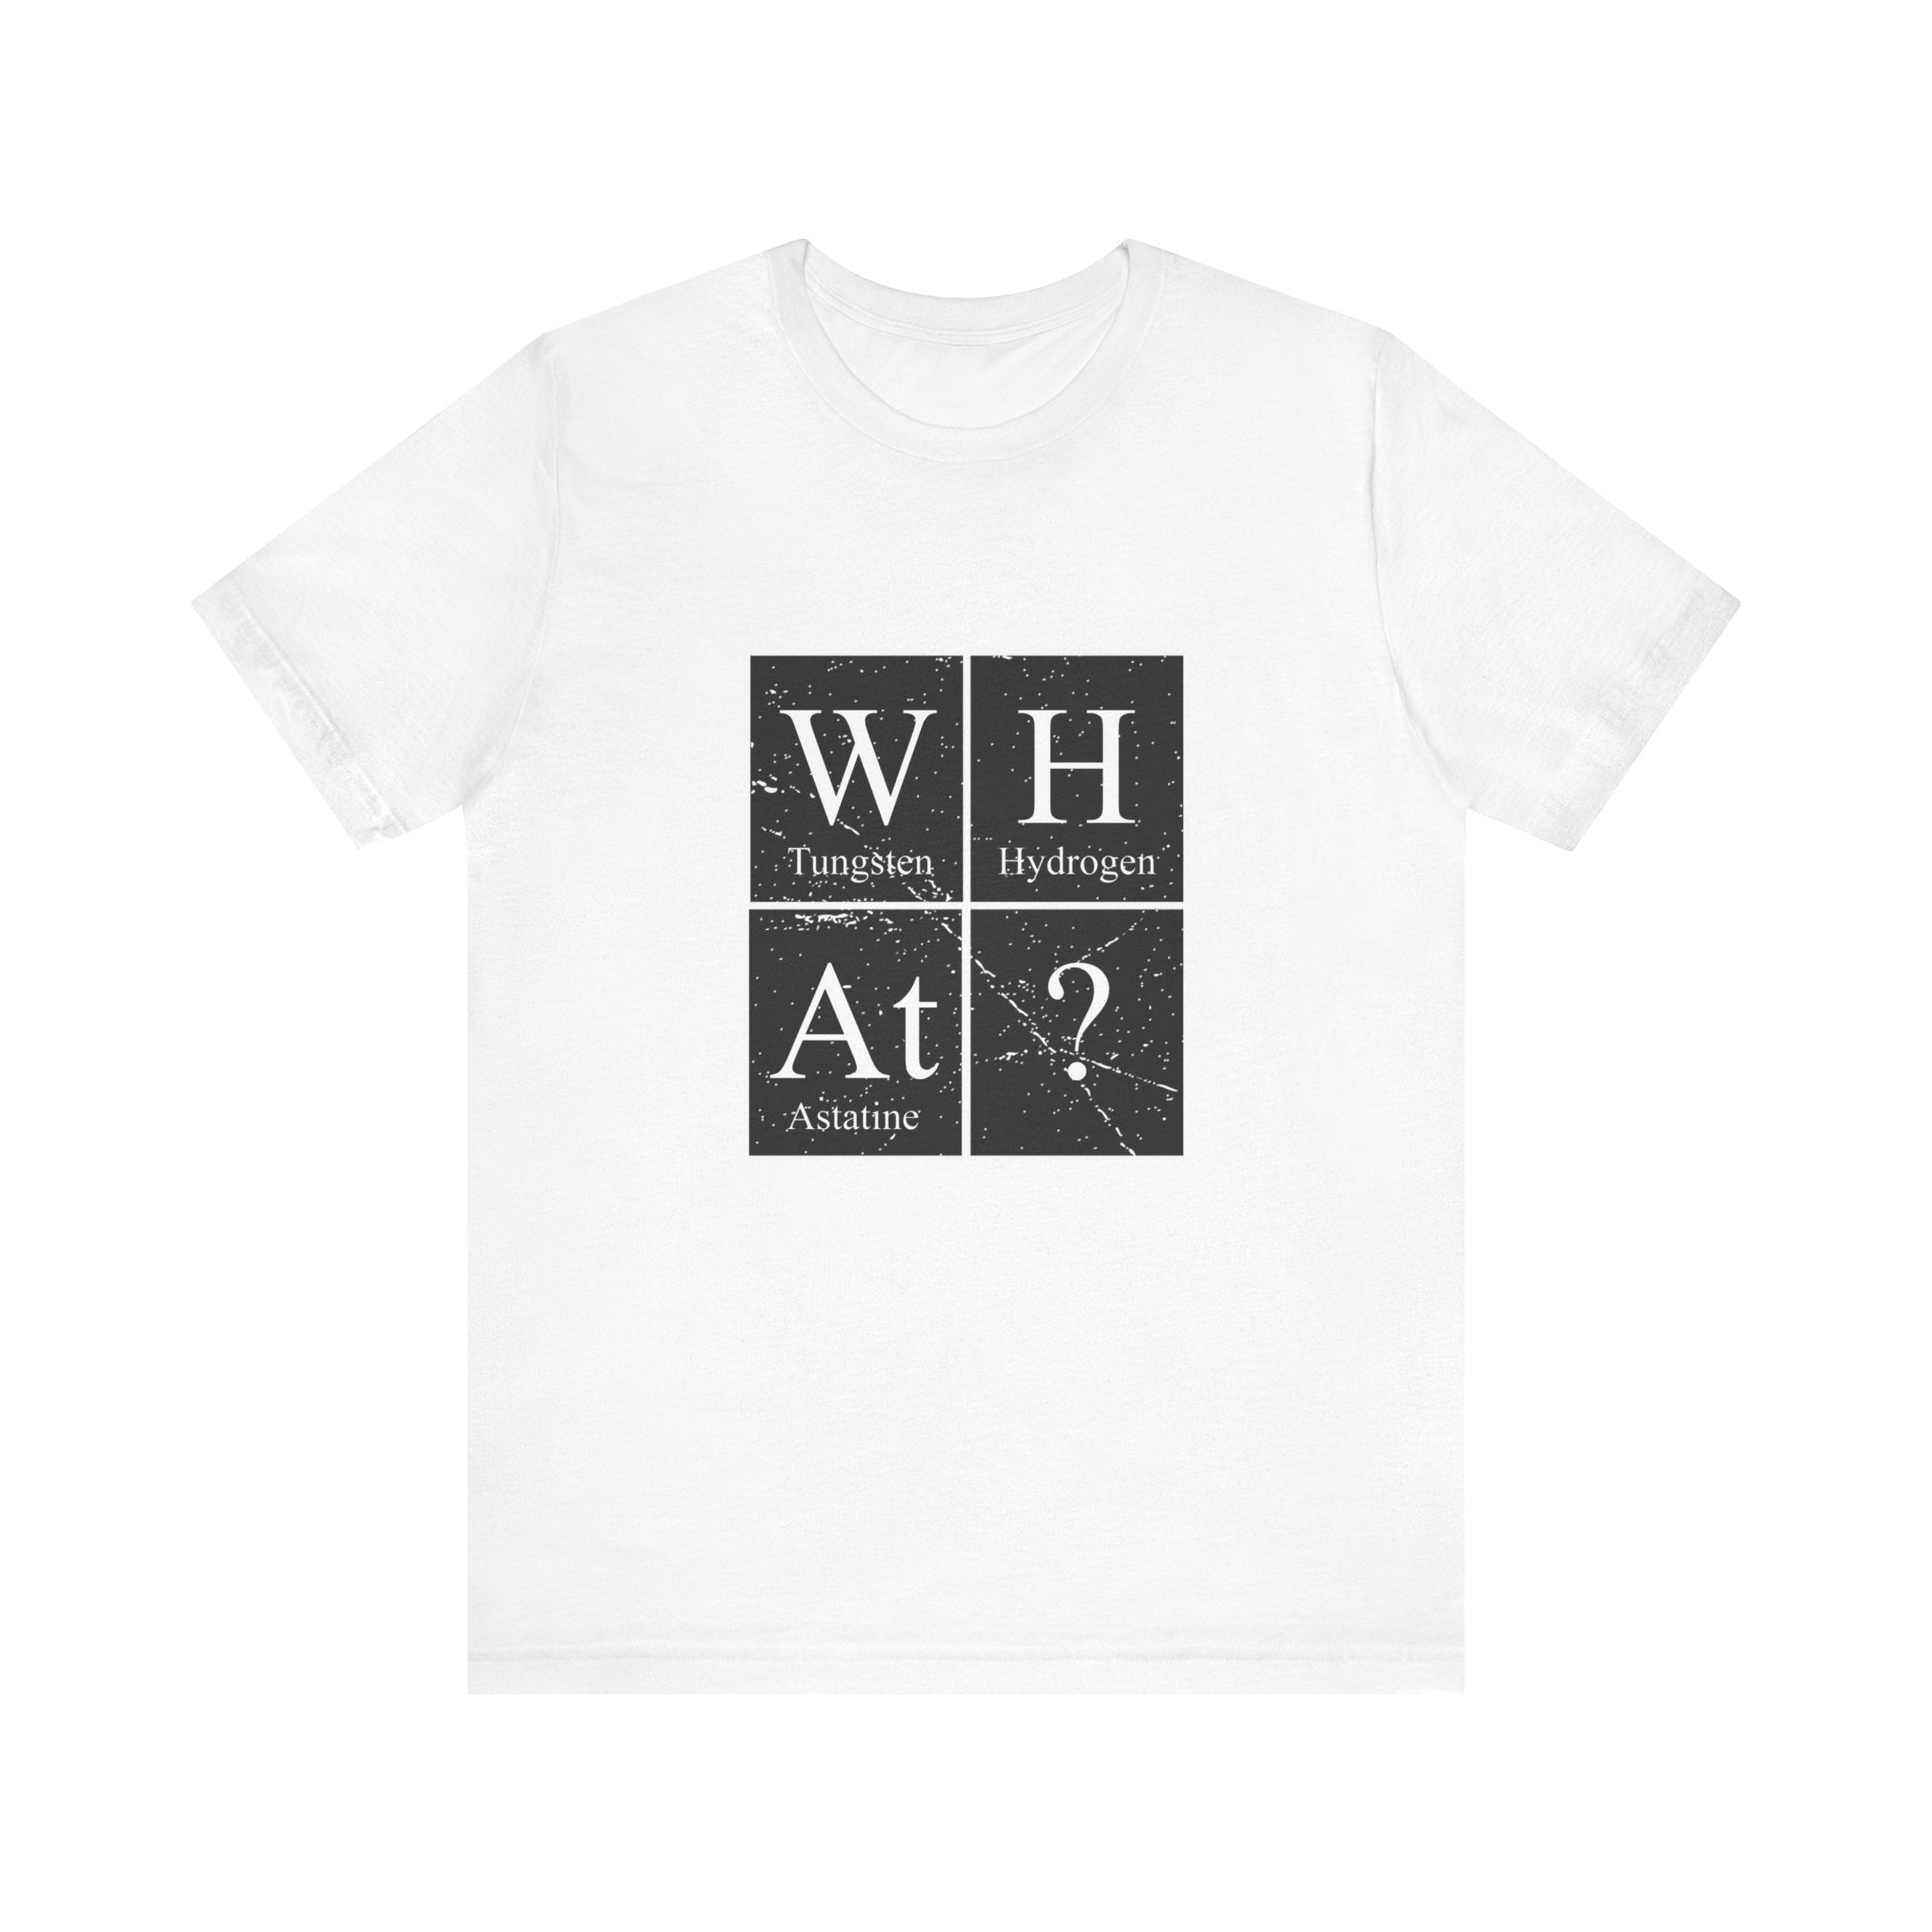 Unisex jersey tee with a black square graphic featuring W-H-At-?, arranged in a grid pattern.